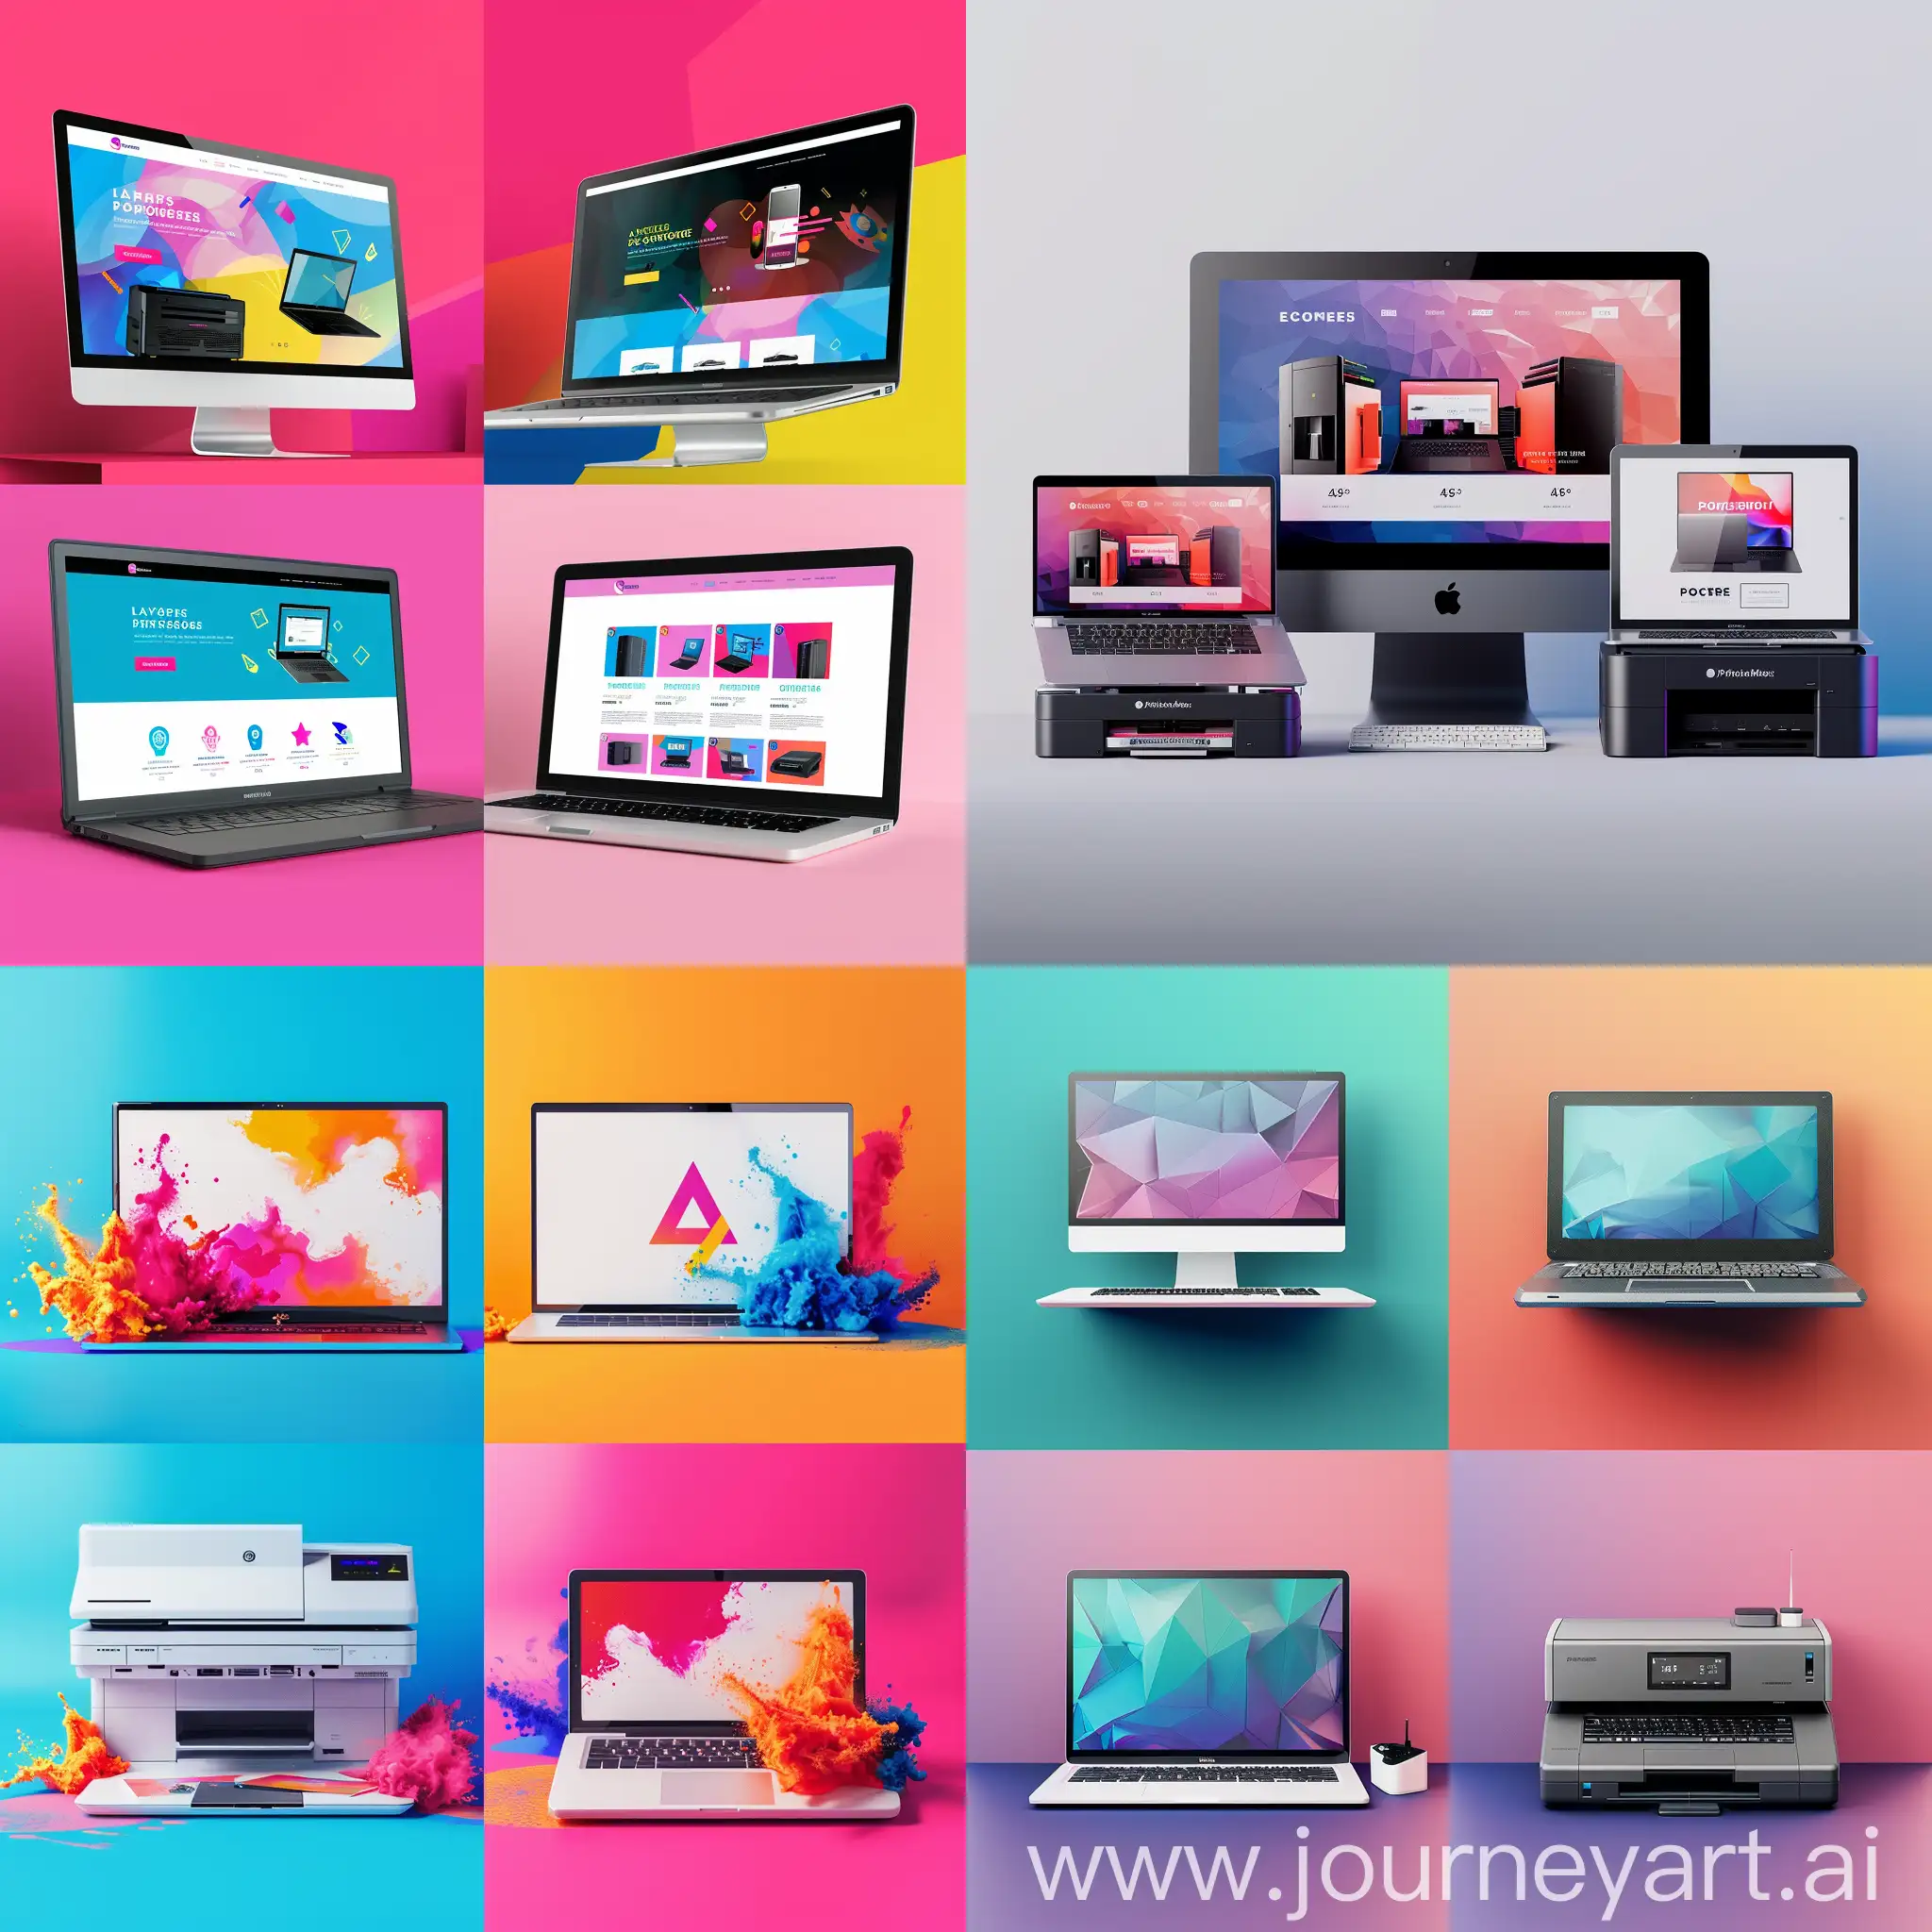 GENERATE FOR ME 4 WEBSITE DISPLAY BANNERS FOR AN ECOMMERCE WEBSITE THAT SELLS LAPTOPS, PRINTERS USE POPPING COLORS